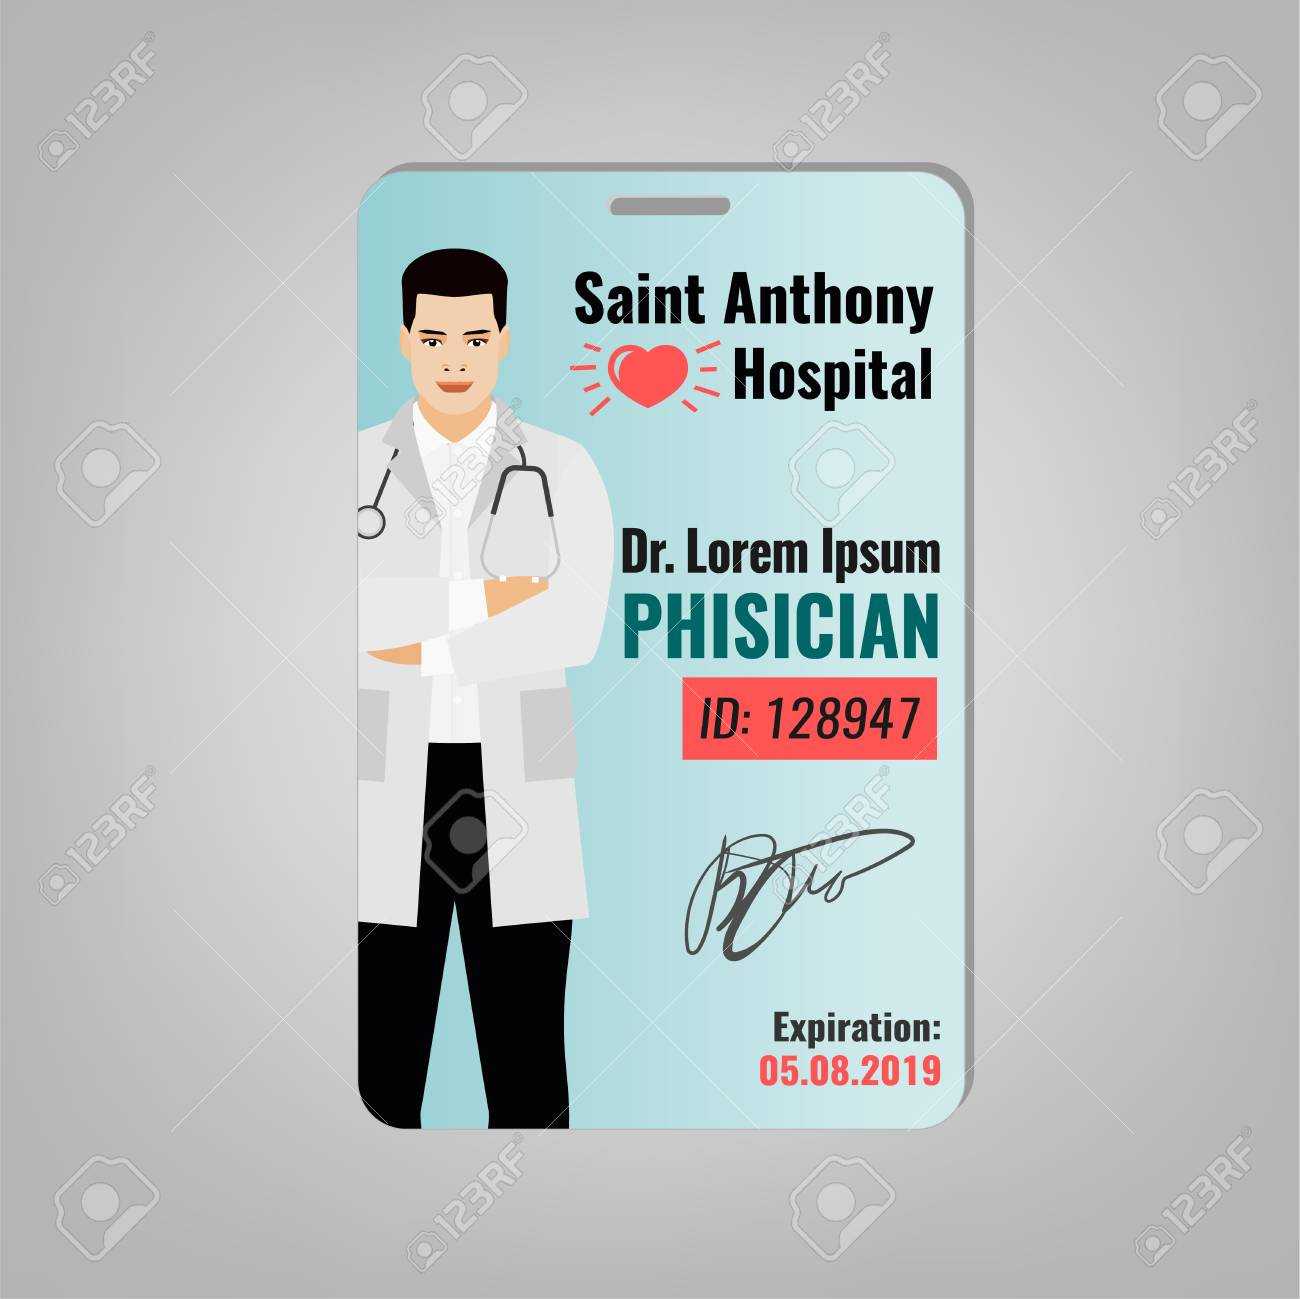 Doctors Id Card With Hospital Logo And Phisician Image. Medical.. For Hospital Id Card Template